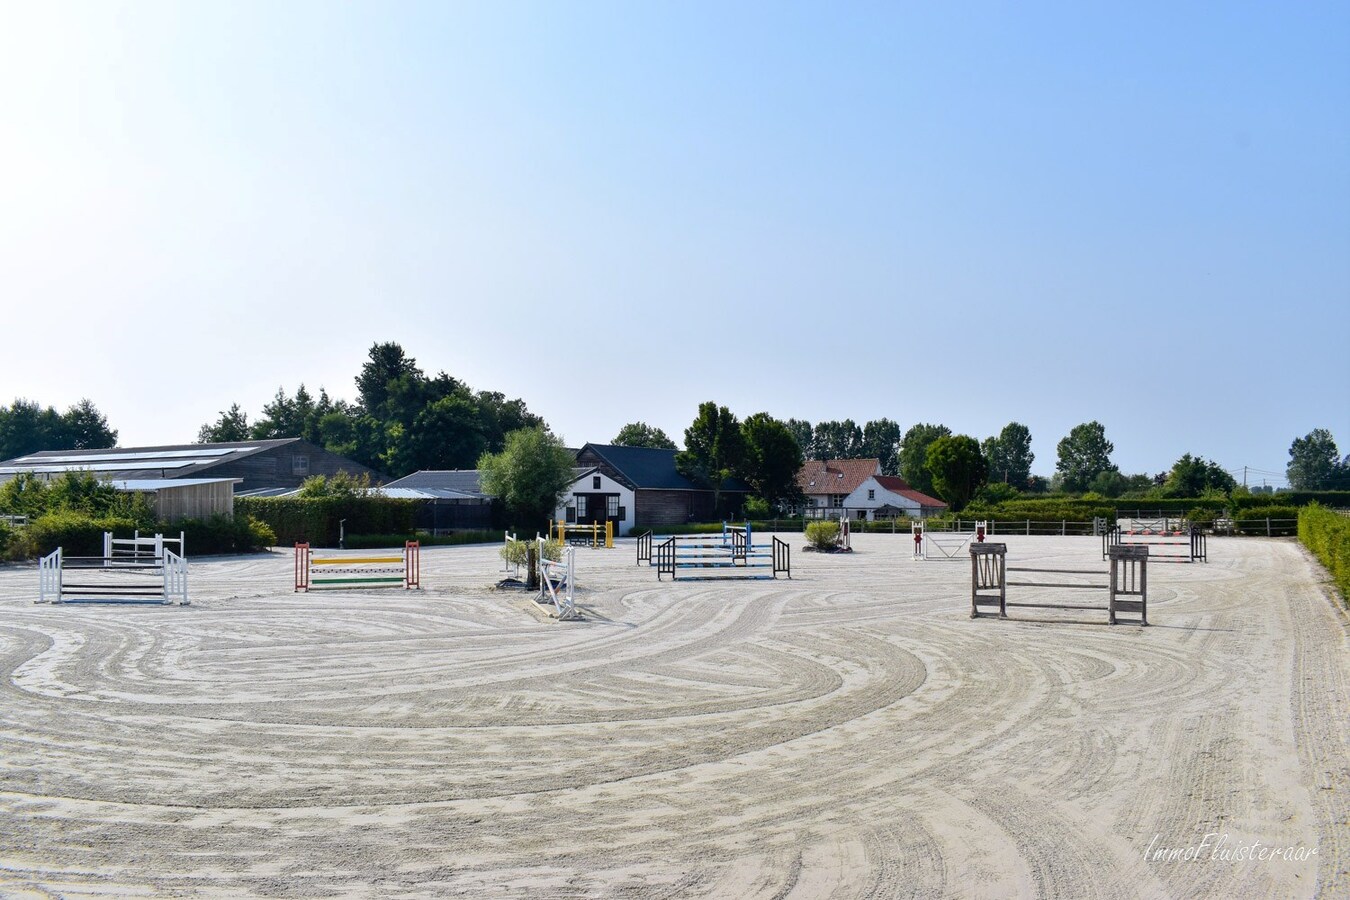 Unique Equestrian Complex with various possibilities in Veurne on approx. 9ac and 44 ac 